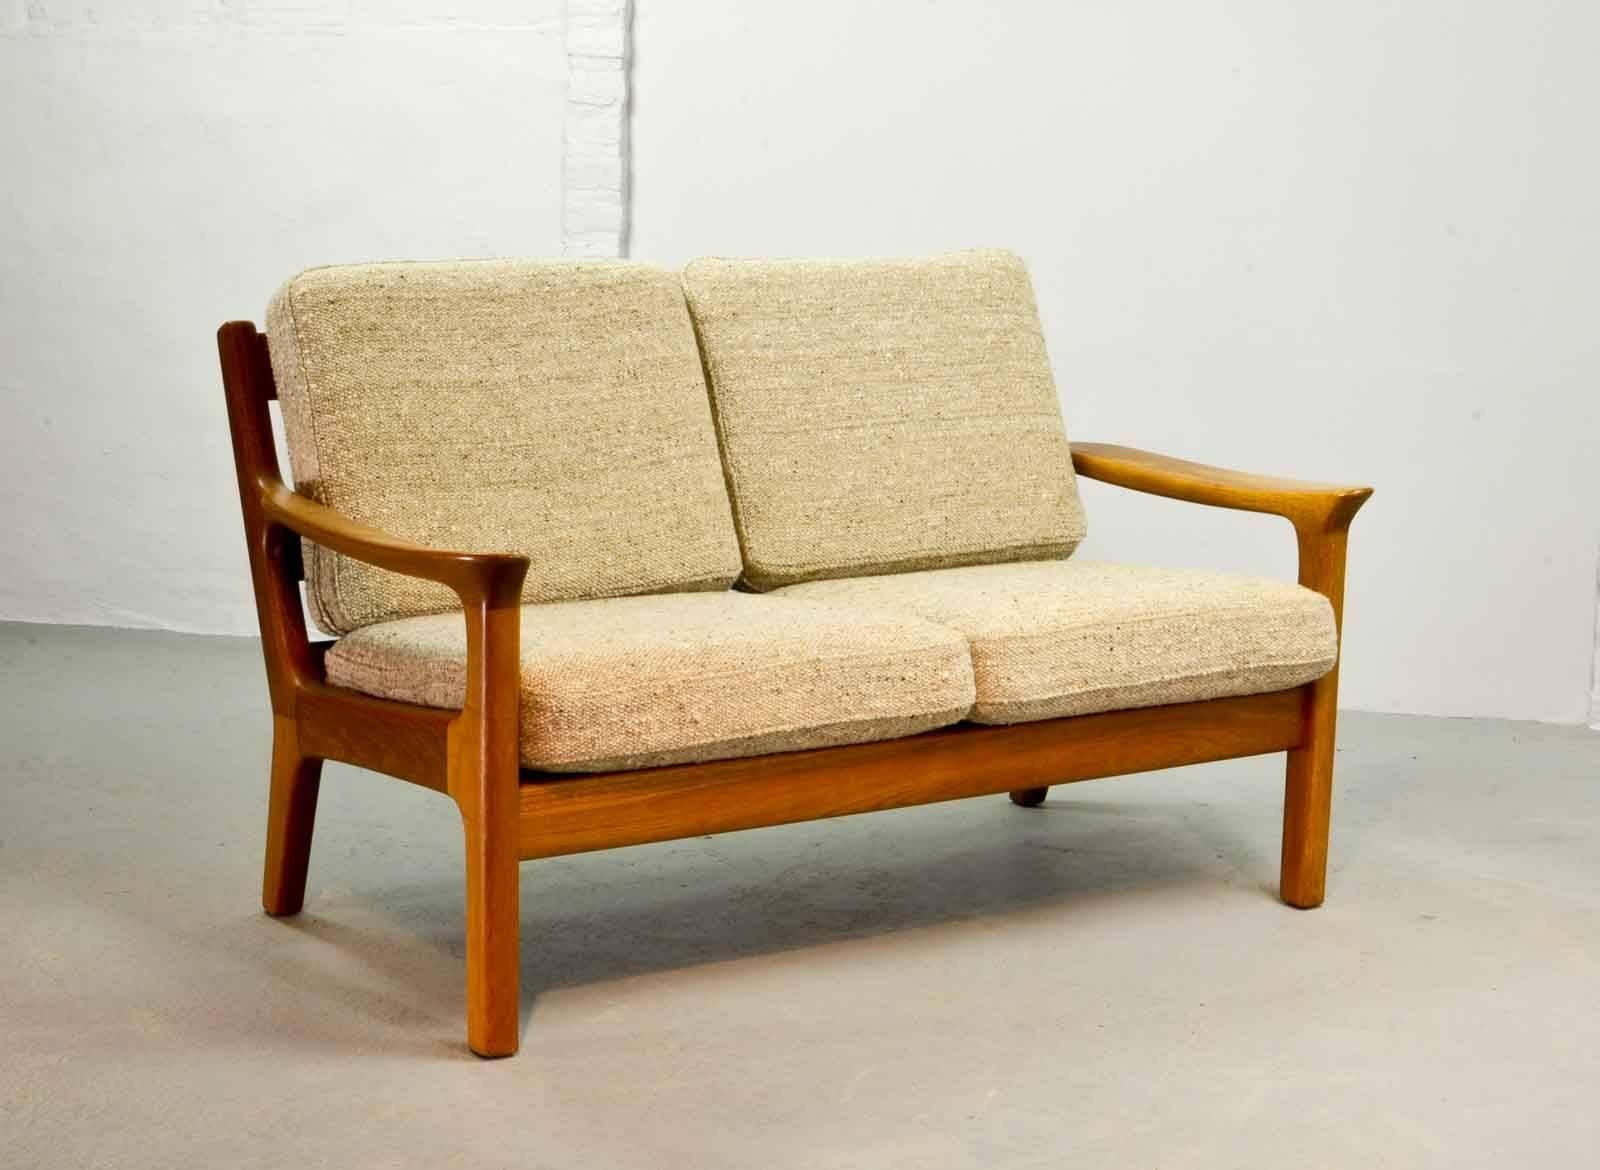 Two-seat sofa in solid teak and cushions designed by the Danish designer Juul Kristensen and manufactured by Glostrup Furniture Factory in the 1960s. The cushions are upholstered with a sandy colored high quality fabric. Both the teak wooden frame